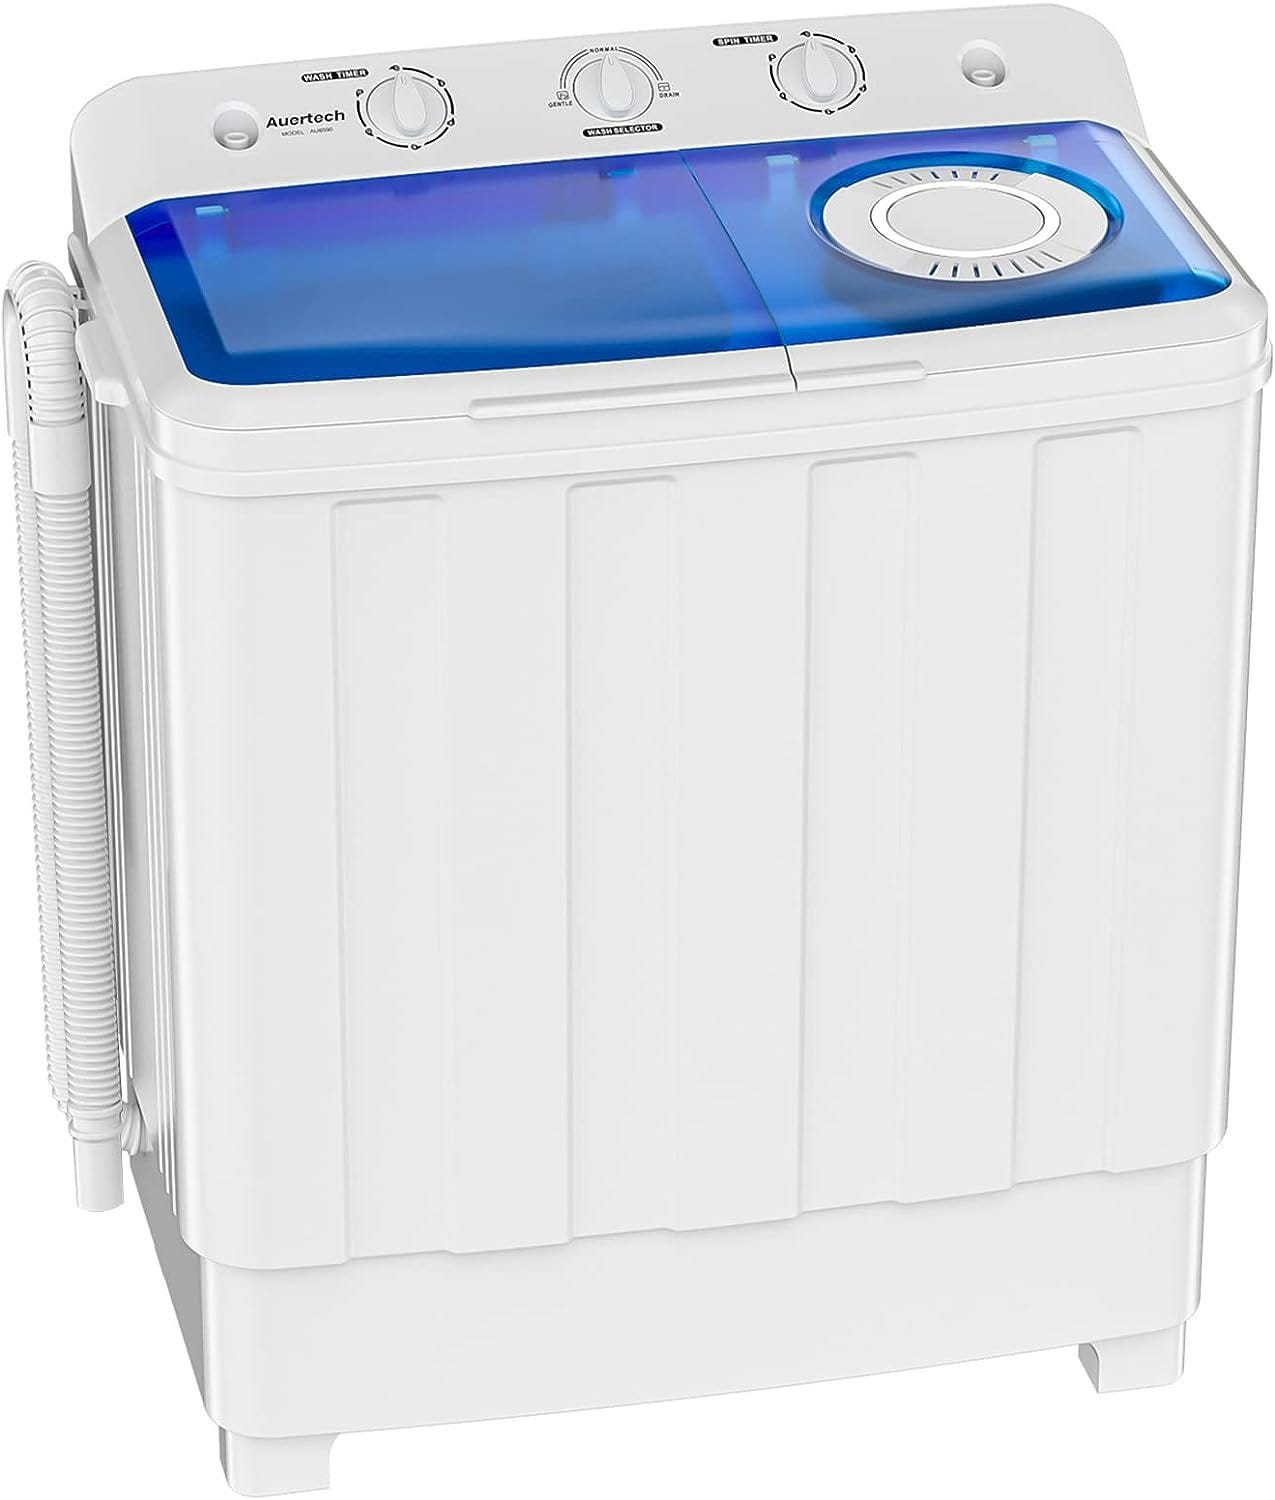 Convenience Unleashed: The Ultimate Guide to Portable Washing Machines, by  Don Academy